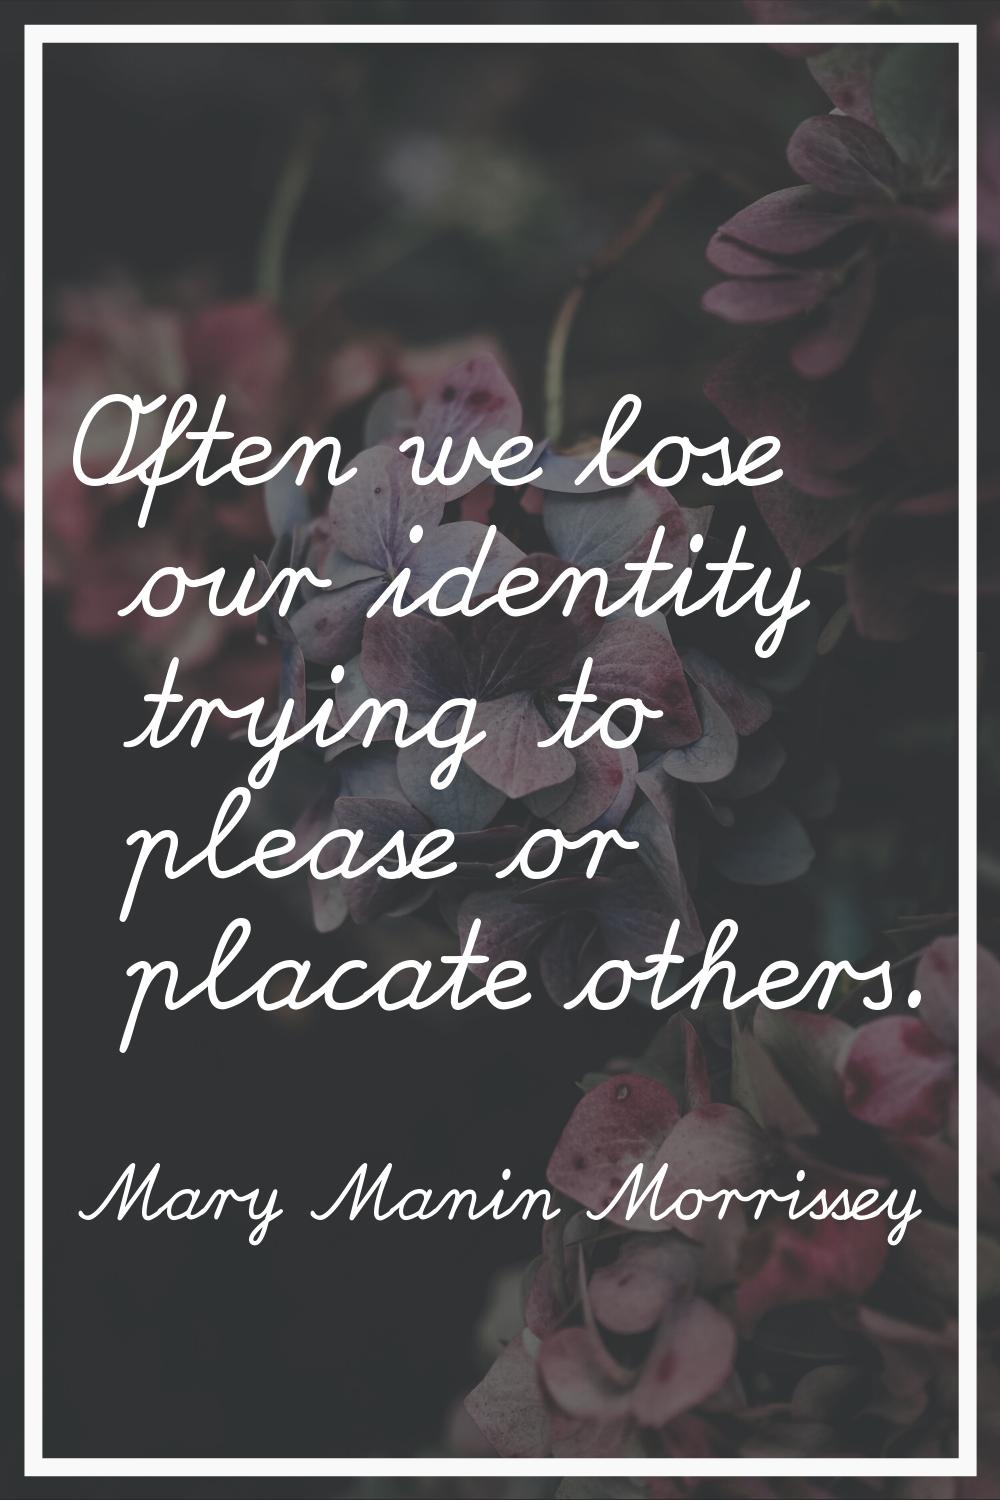 Often we lose our identity trying to please or placate others.